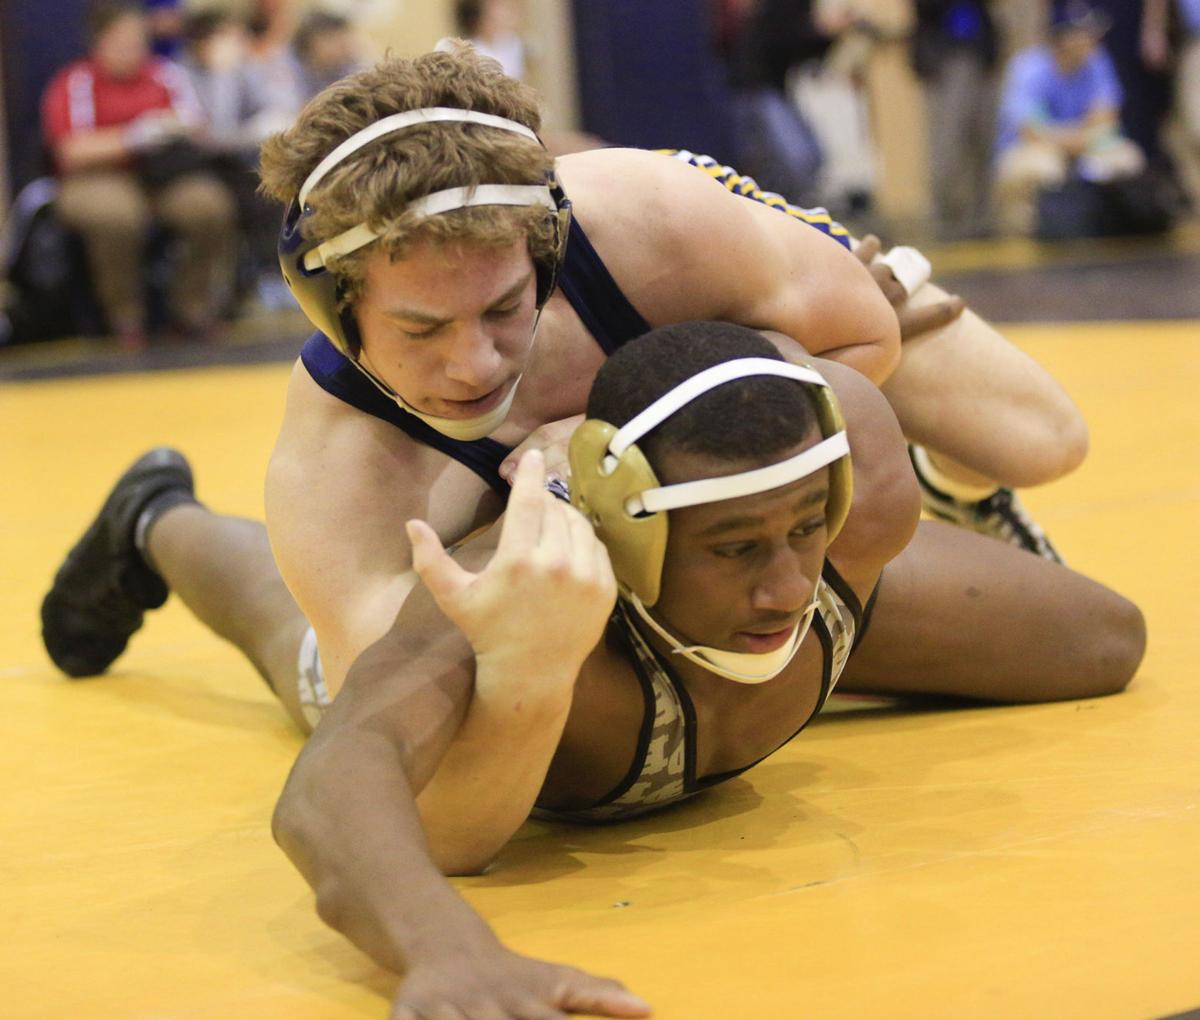 Five LL wrestlers crowned at Penn Manor Holiday Tournament Sports